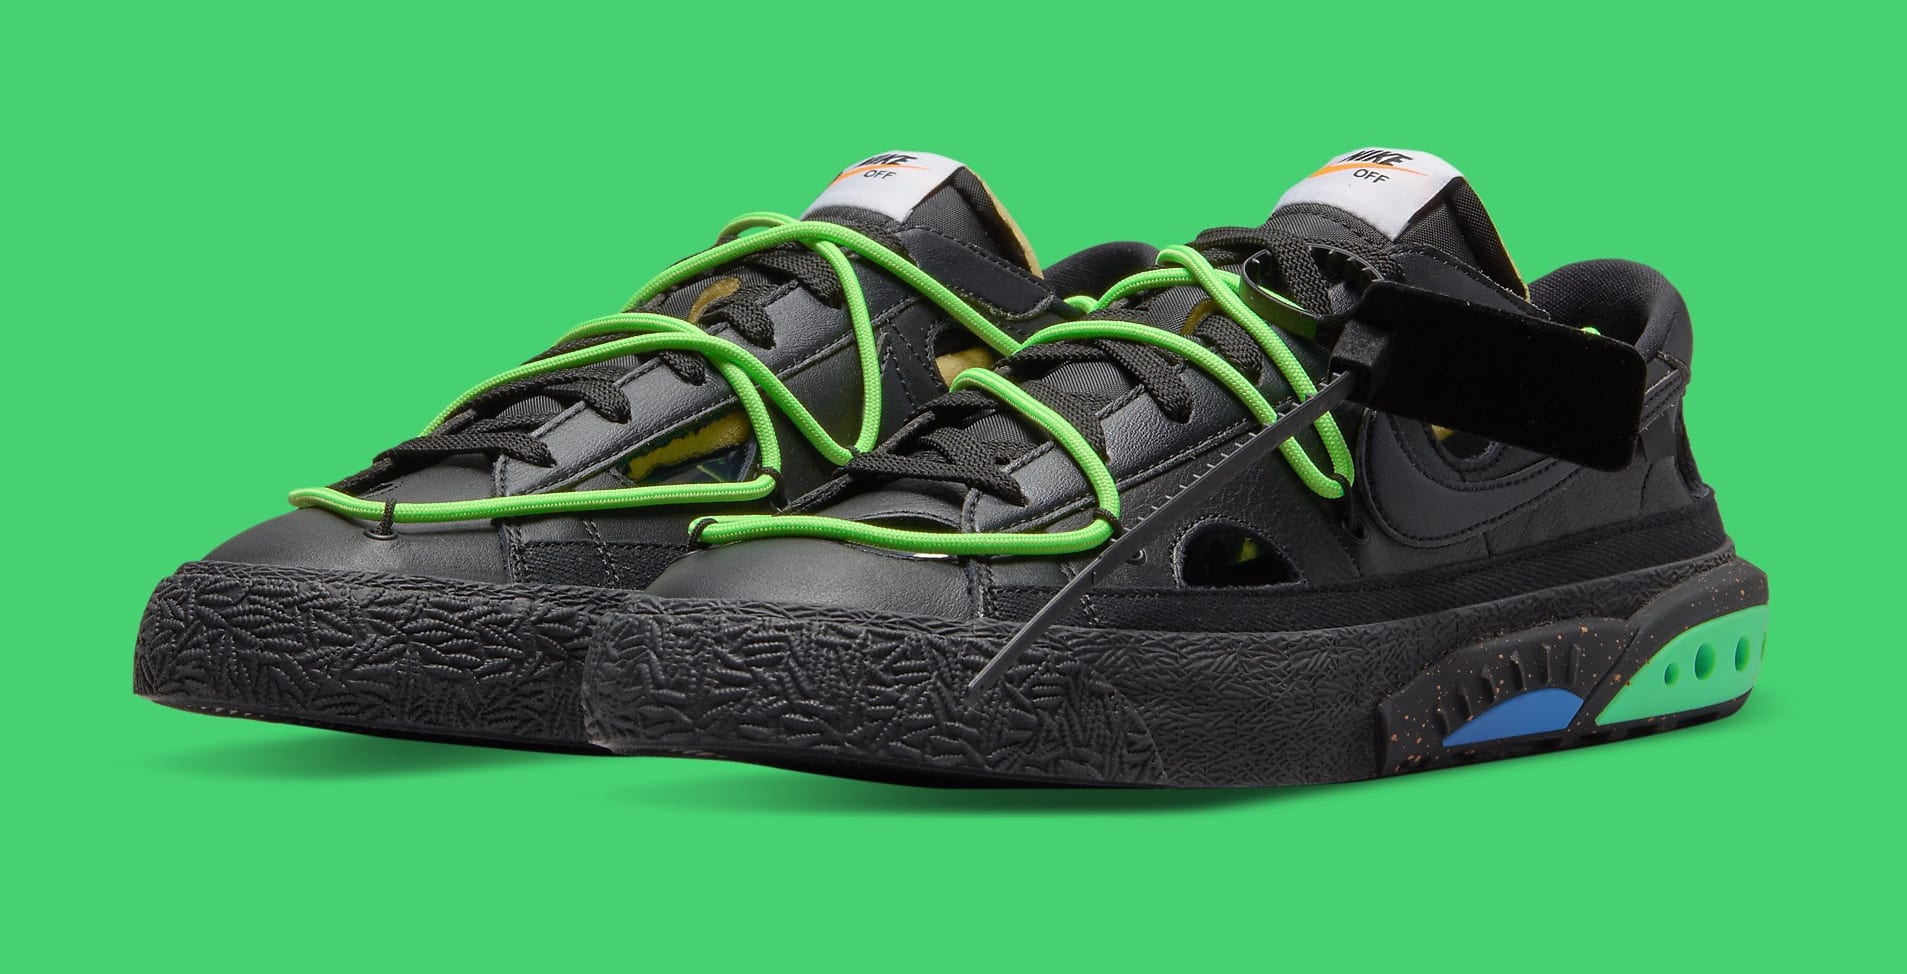 Virgil Abloh First Posthumous Off-White x Nike Collab Release Date 